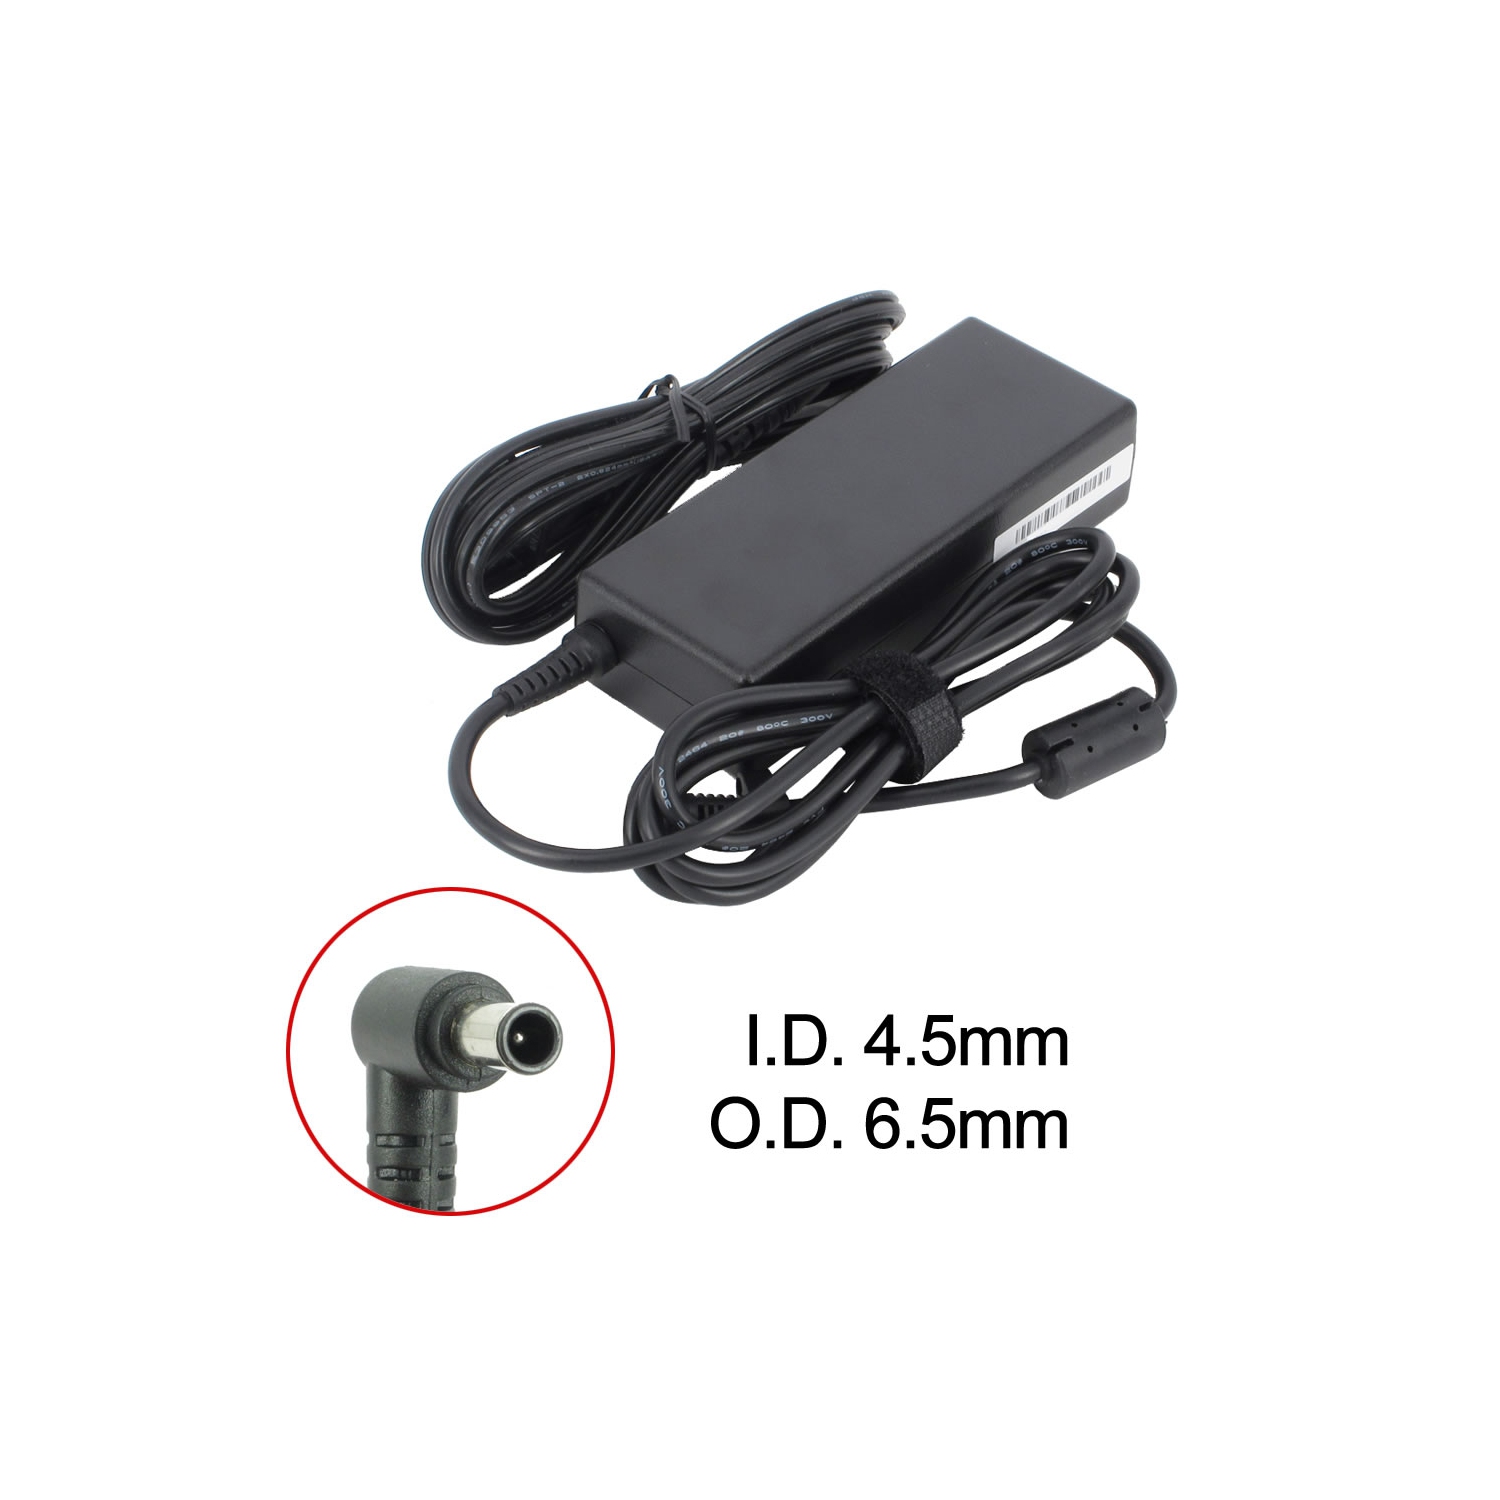 Brand New Laptop AC Adapter for LG XNOTE A515, ADP-90TH A, PCGA-AC19V19, VGP-AC19V14, VGP-AC19V26, VGP-AC19V43